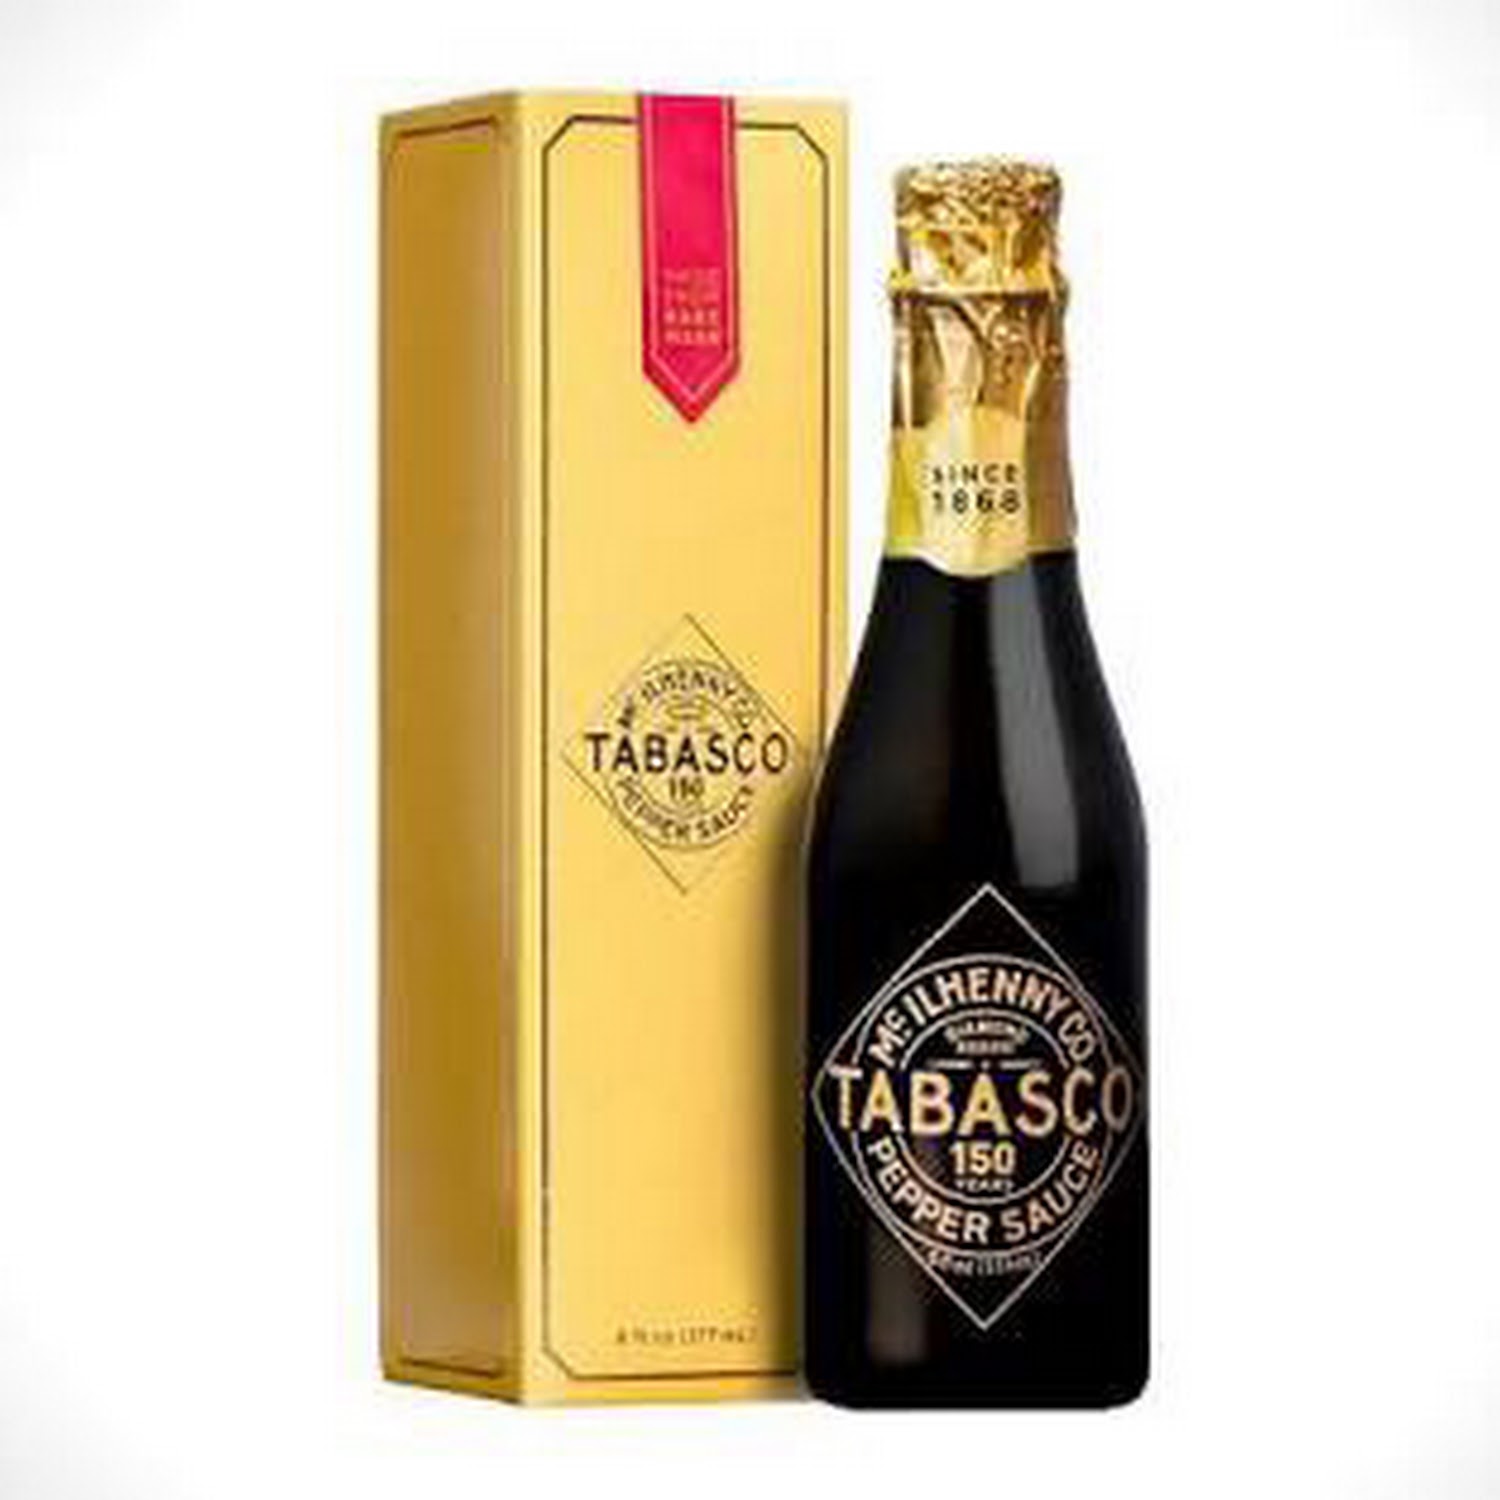 The champagne of hot sauce: Tabasco turns 150 with exclusive Diamond  Reserve – it's hot!